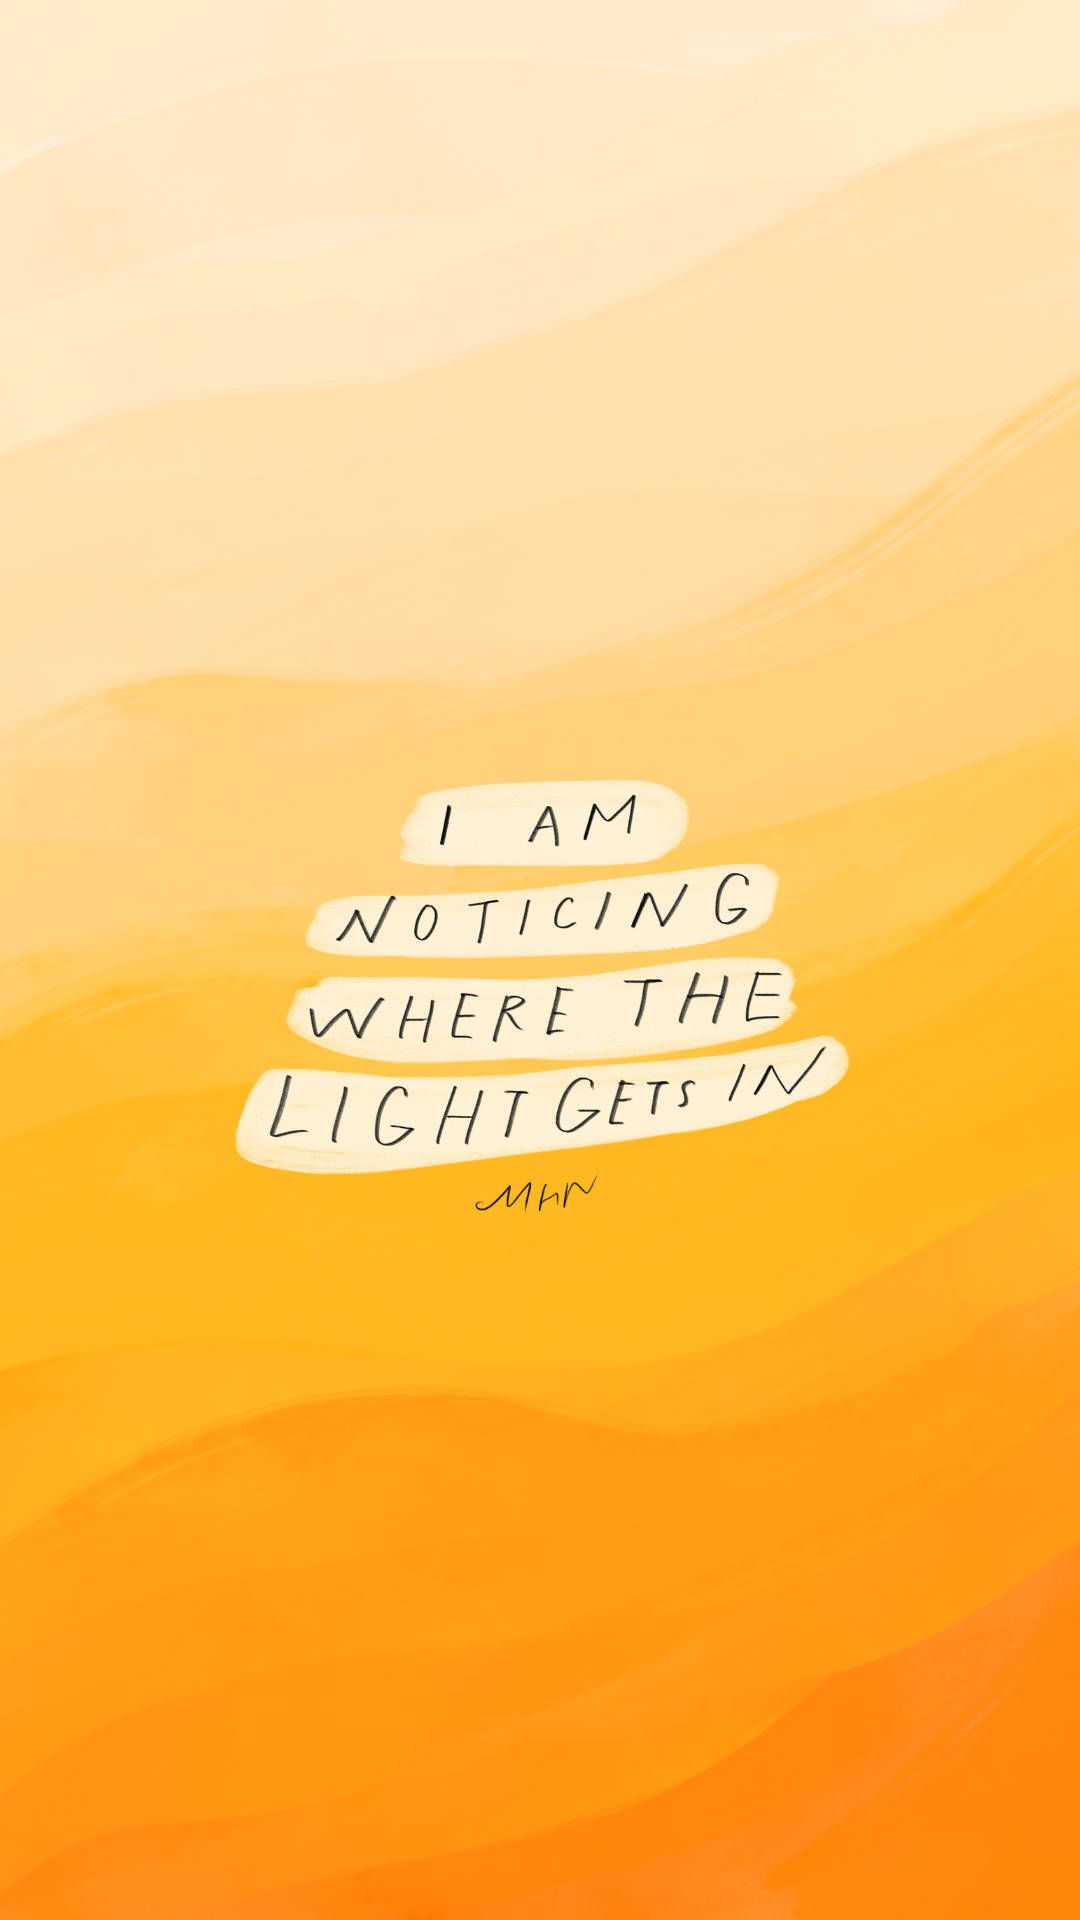 A quote that says i am noticing where the light is in - Light yellow